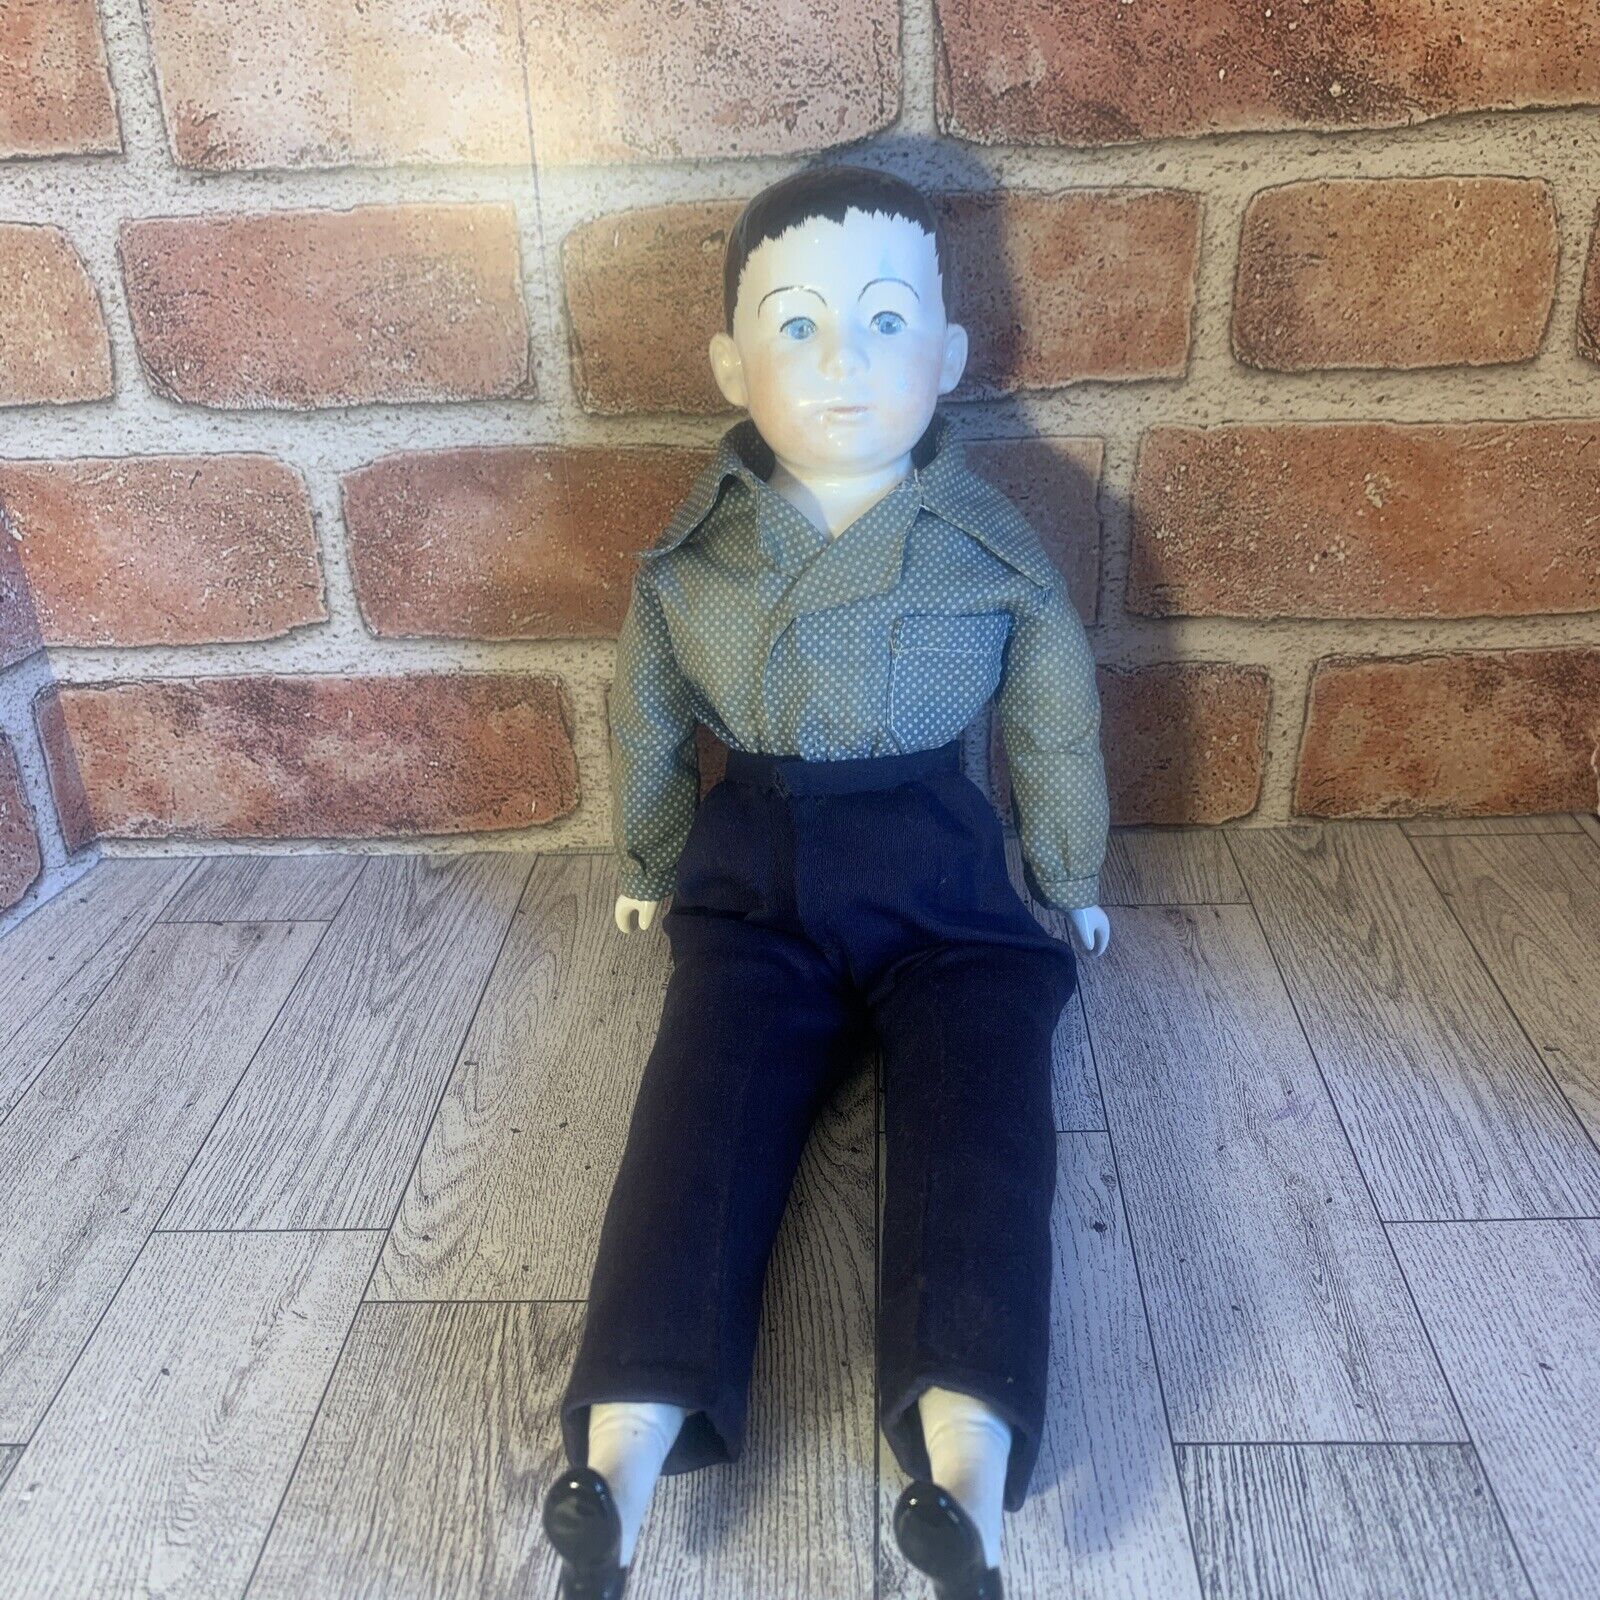 Vintage Bisque WWII German Doll 16” Porcelain Head Arms Feet Hand Painted